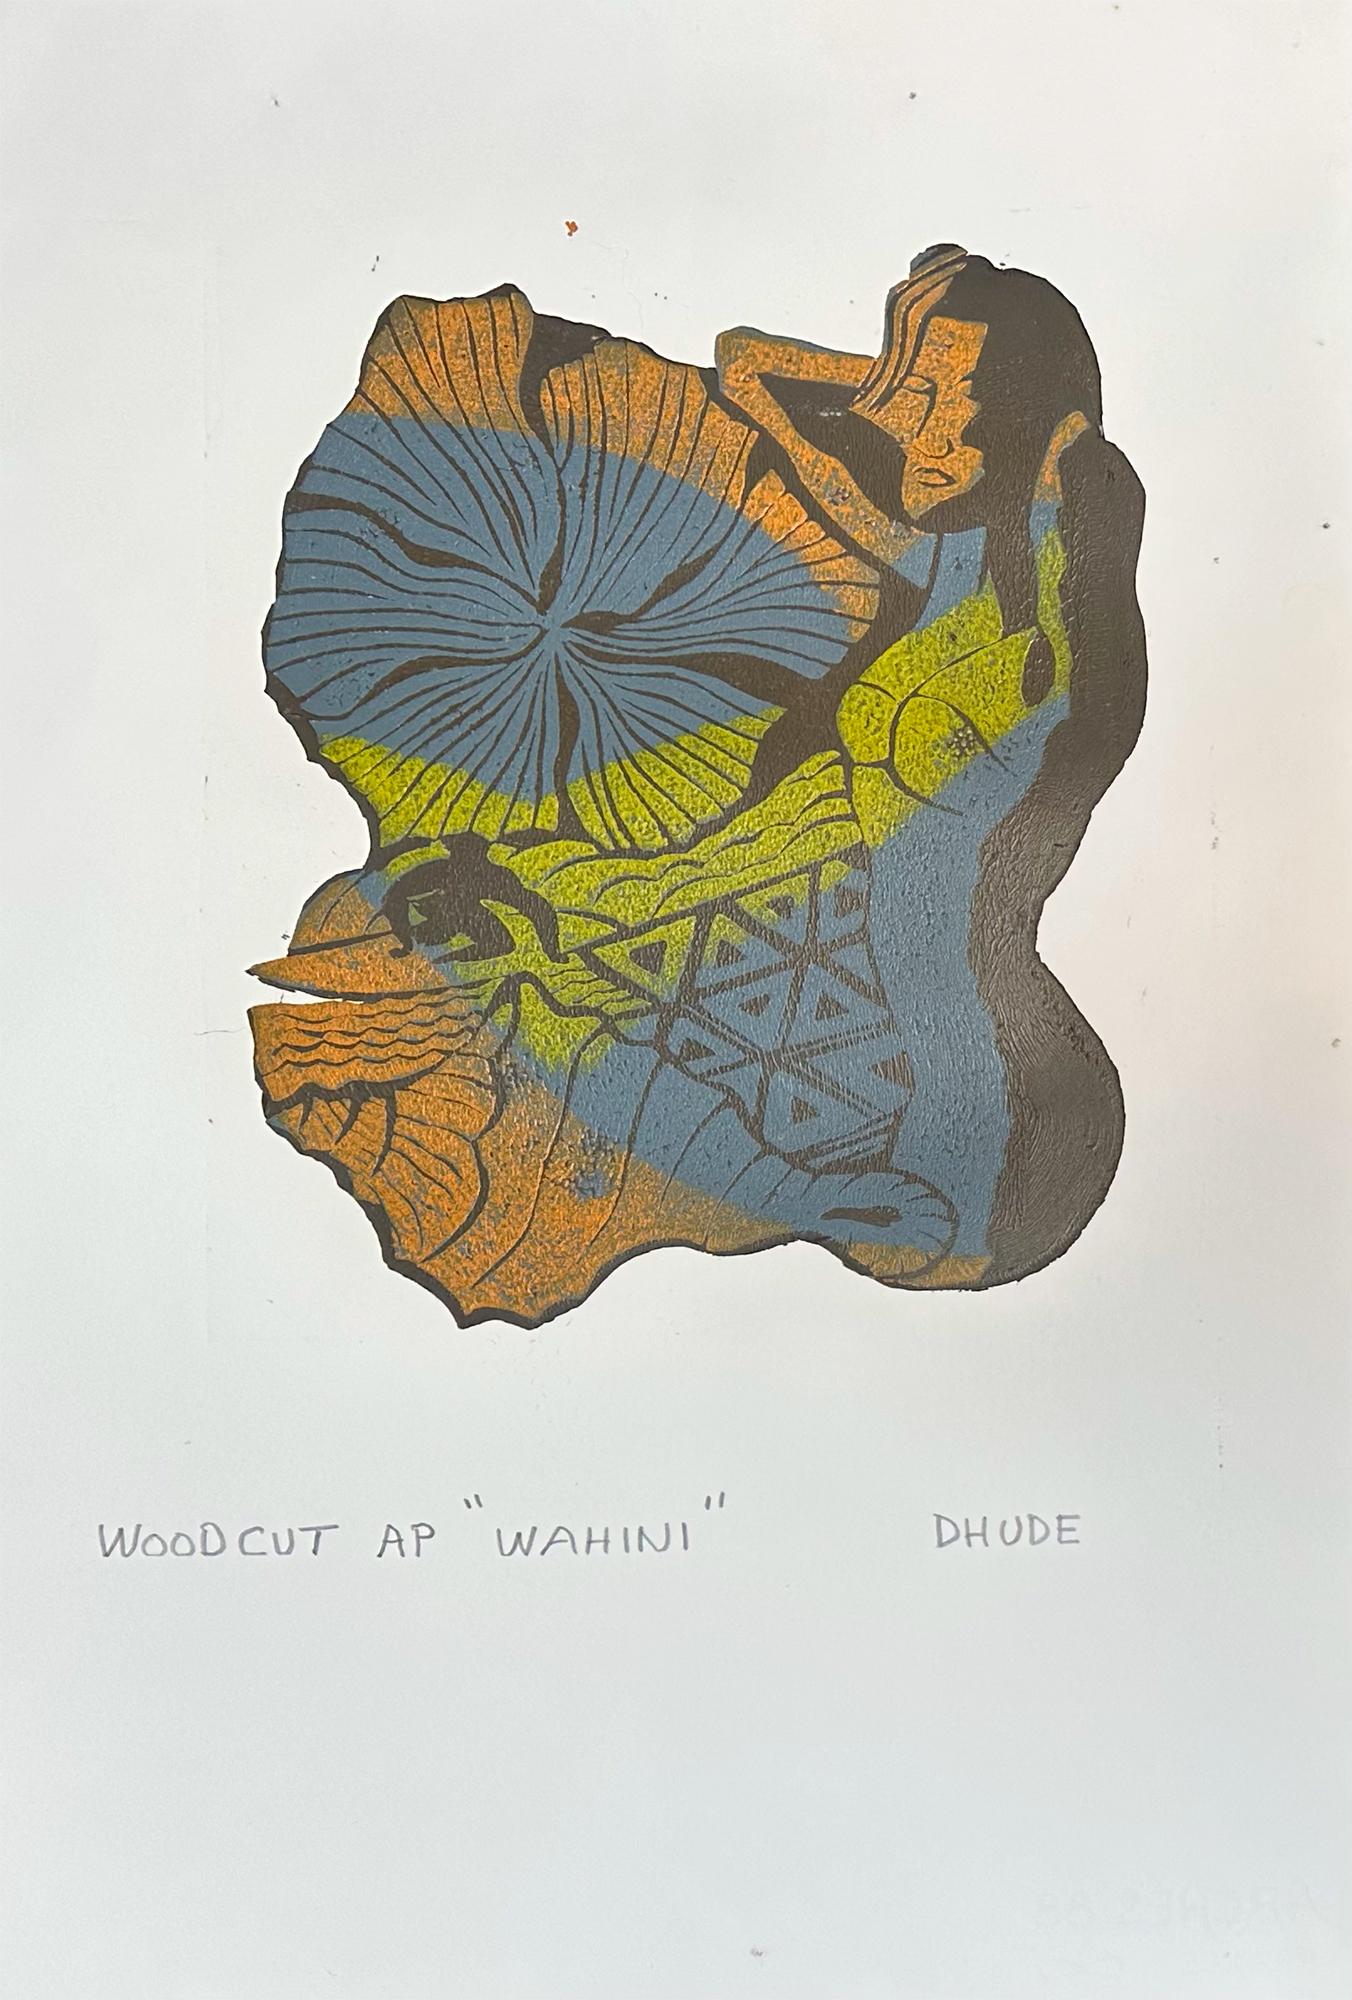 Wahini - Surfing Art - Figurative - Woodcut Print By Marc Zimmerman

Limited Edition 01/04

This masterwork is exhibited in the Zimmerman Gallery, Carmel CA.

Immerse yourself in the captivating world of surfing and ocean vibes with Marc Zimmerman's